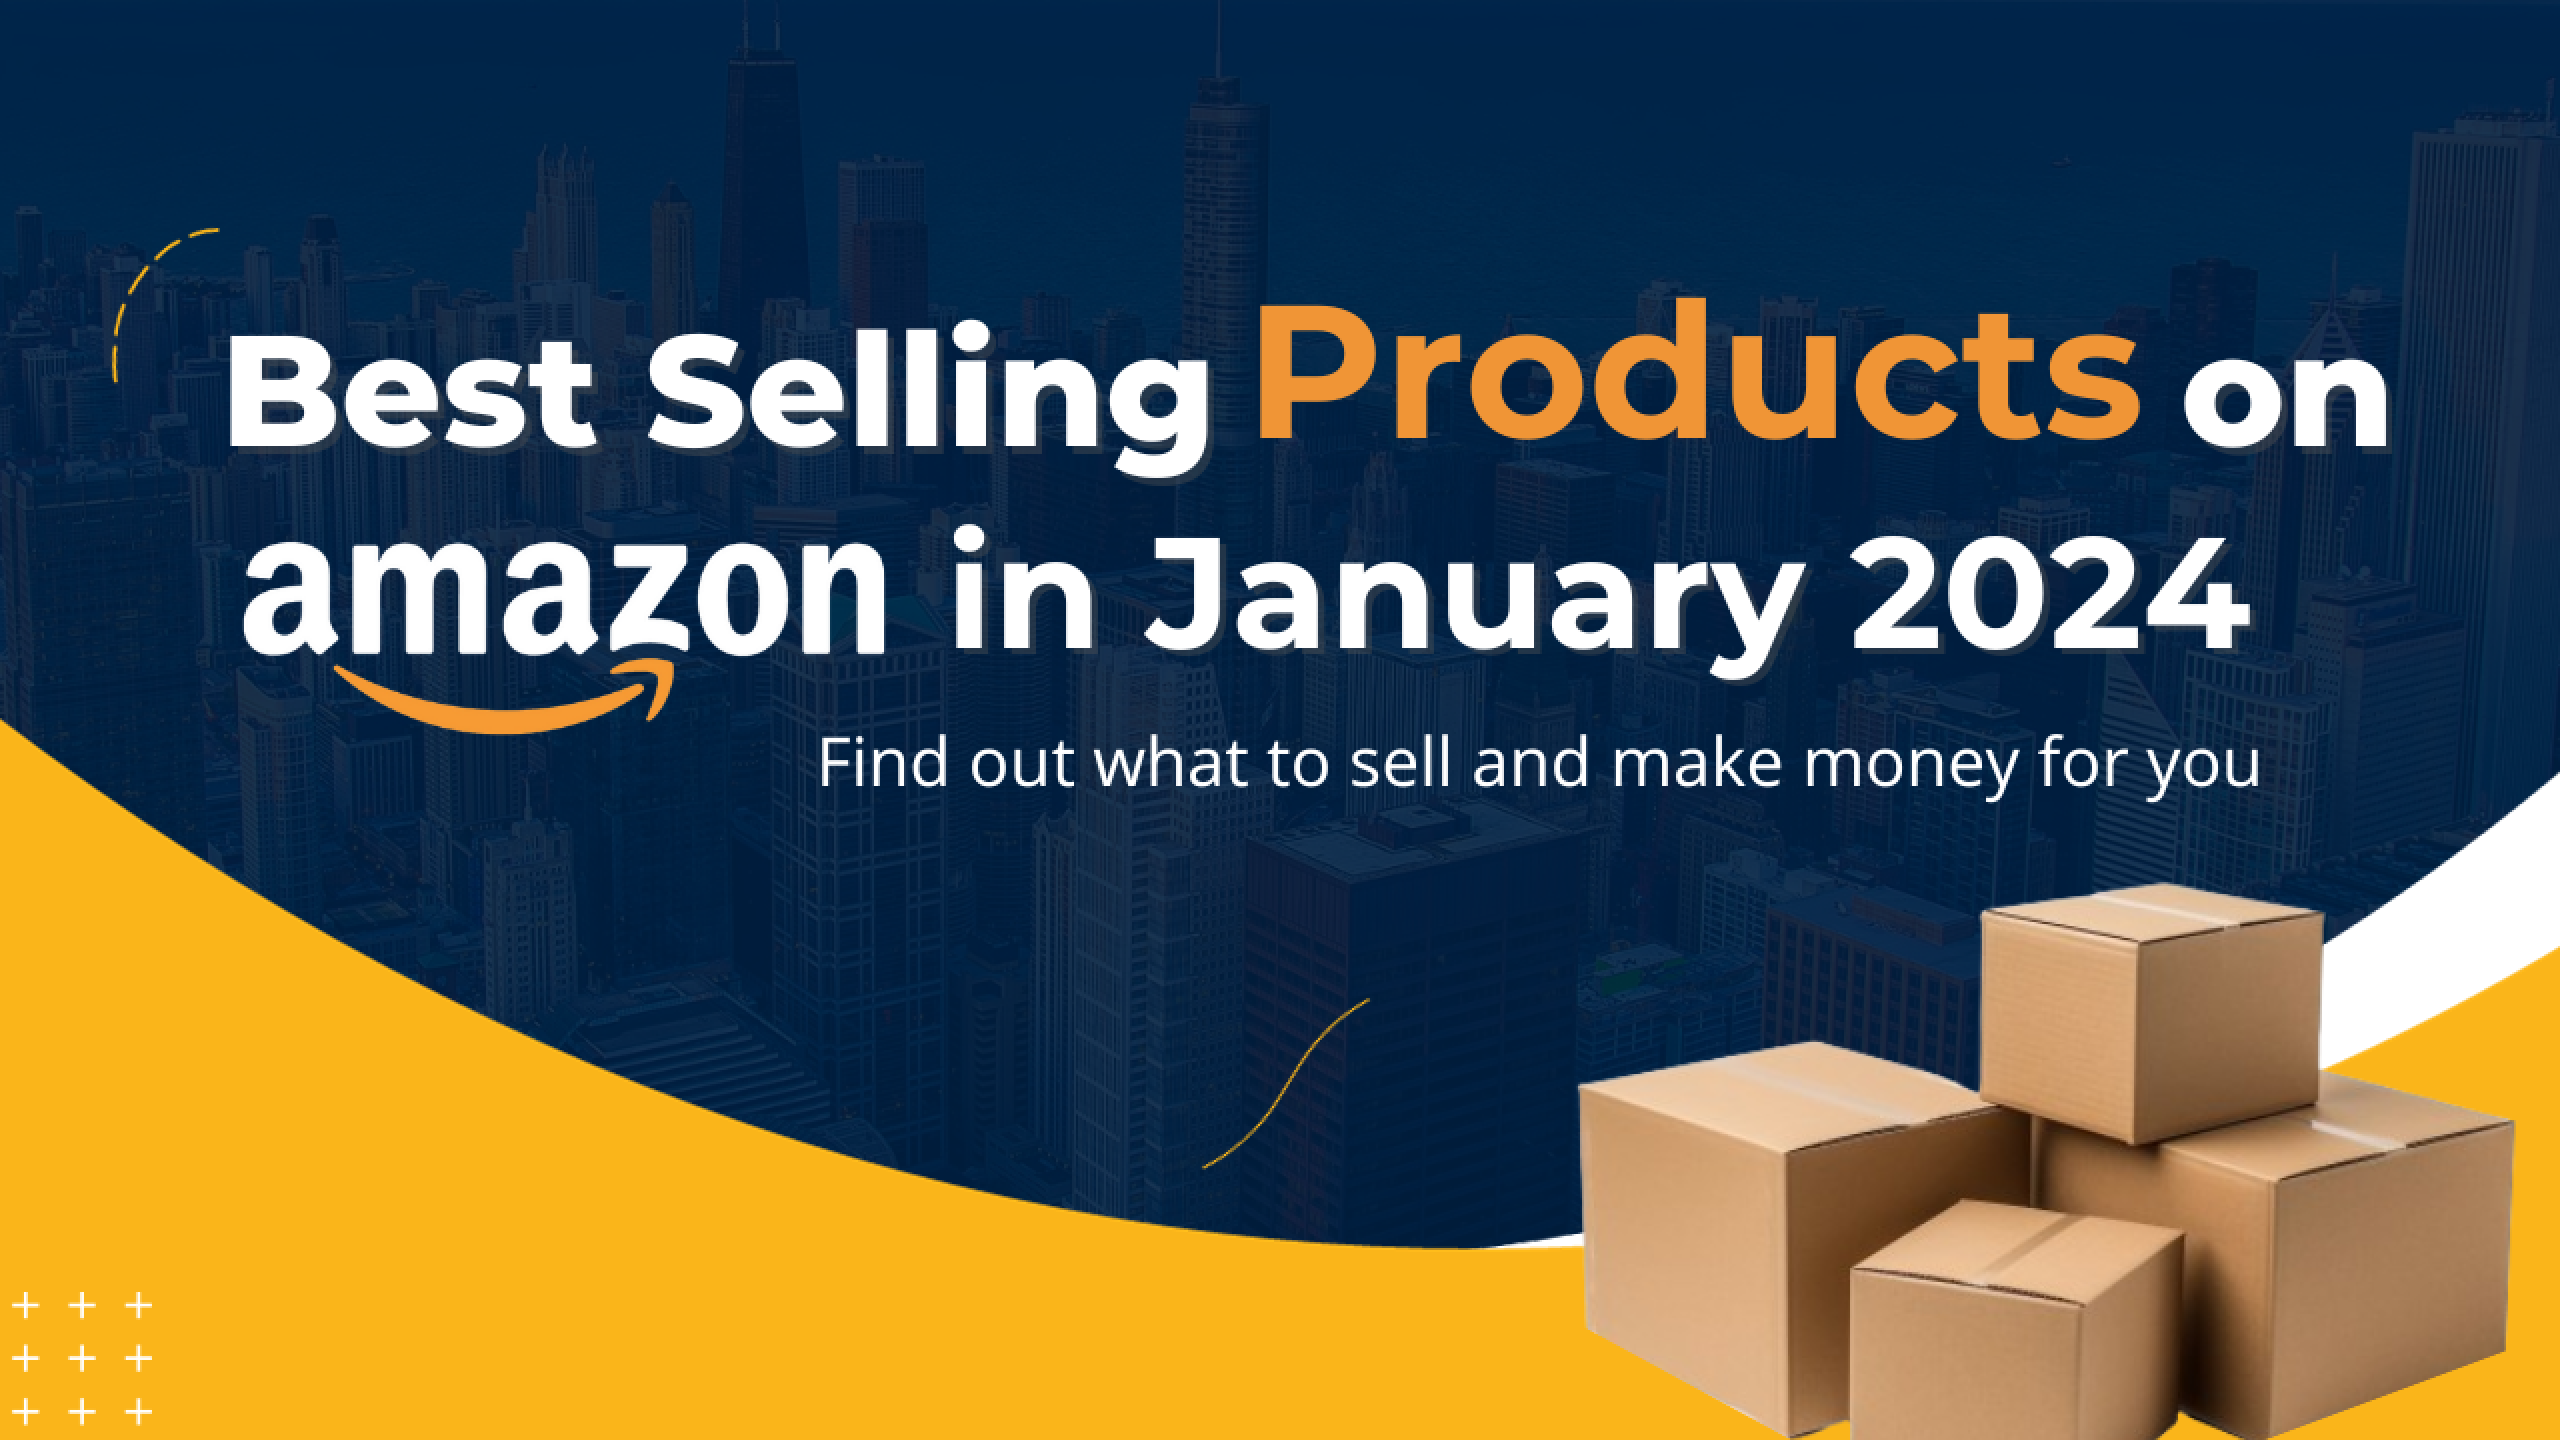 Best selling products on Amazon in January 2024: Find out What to Sell and Make Money